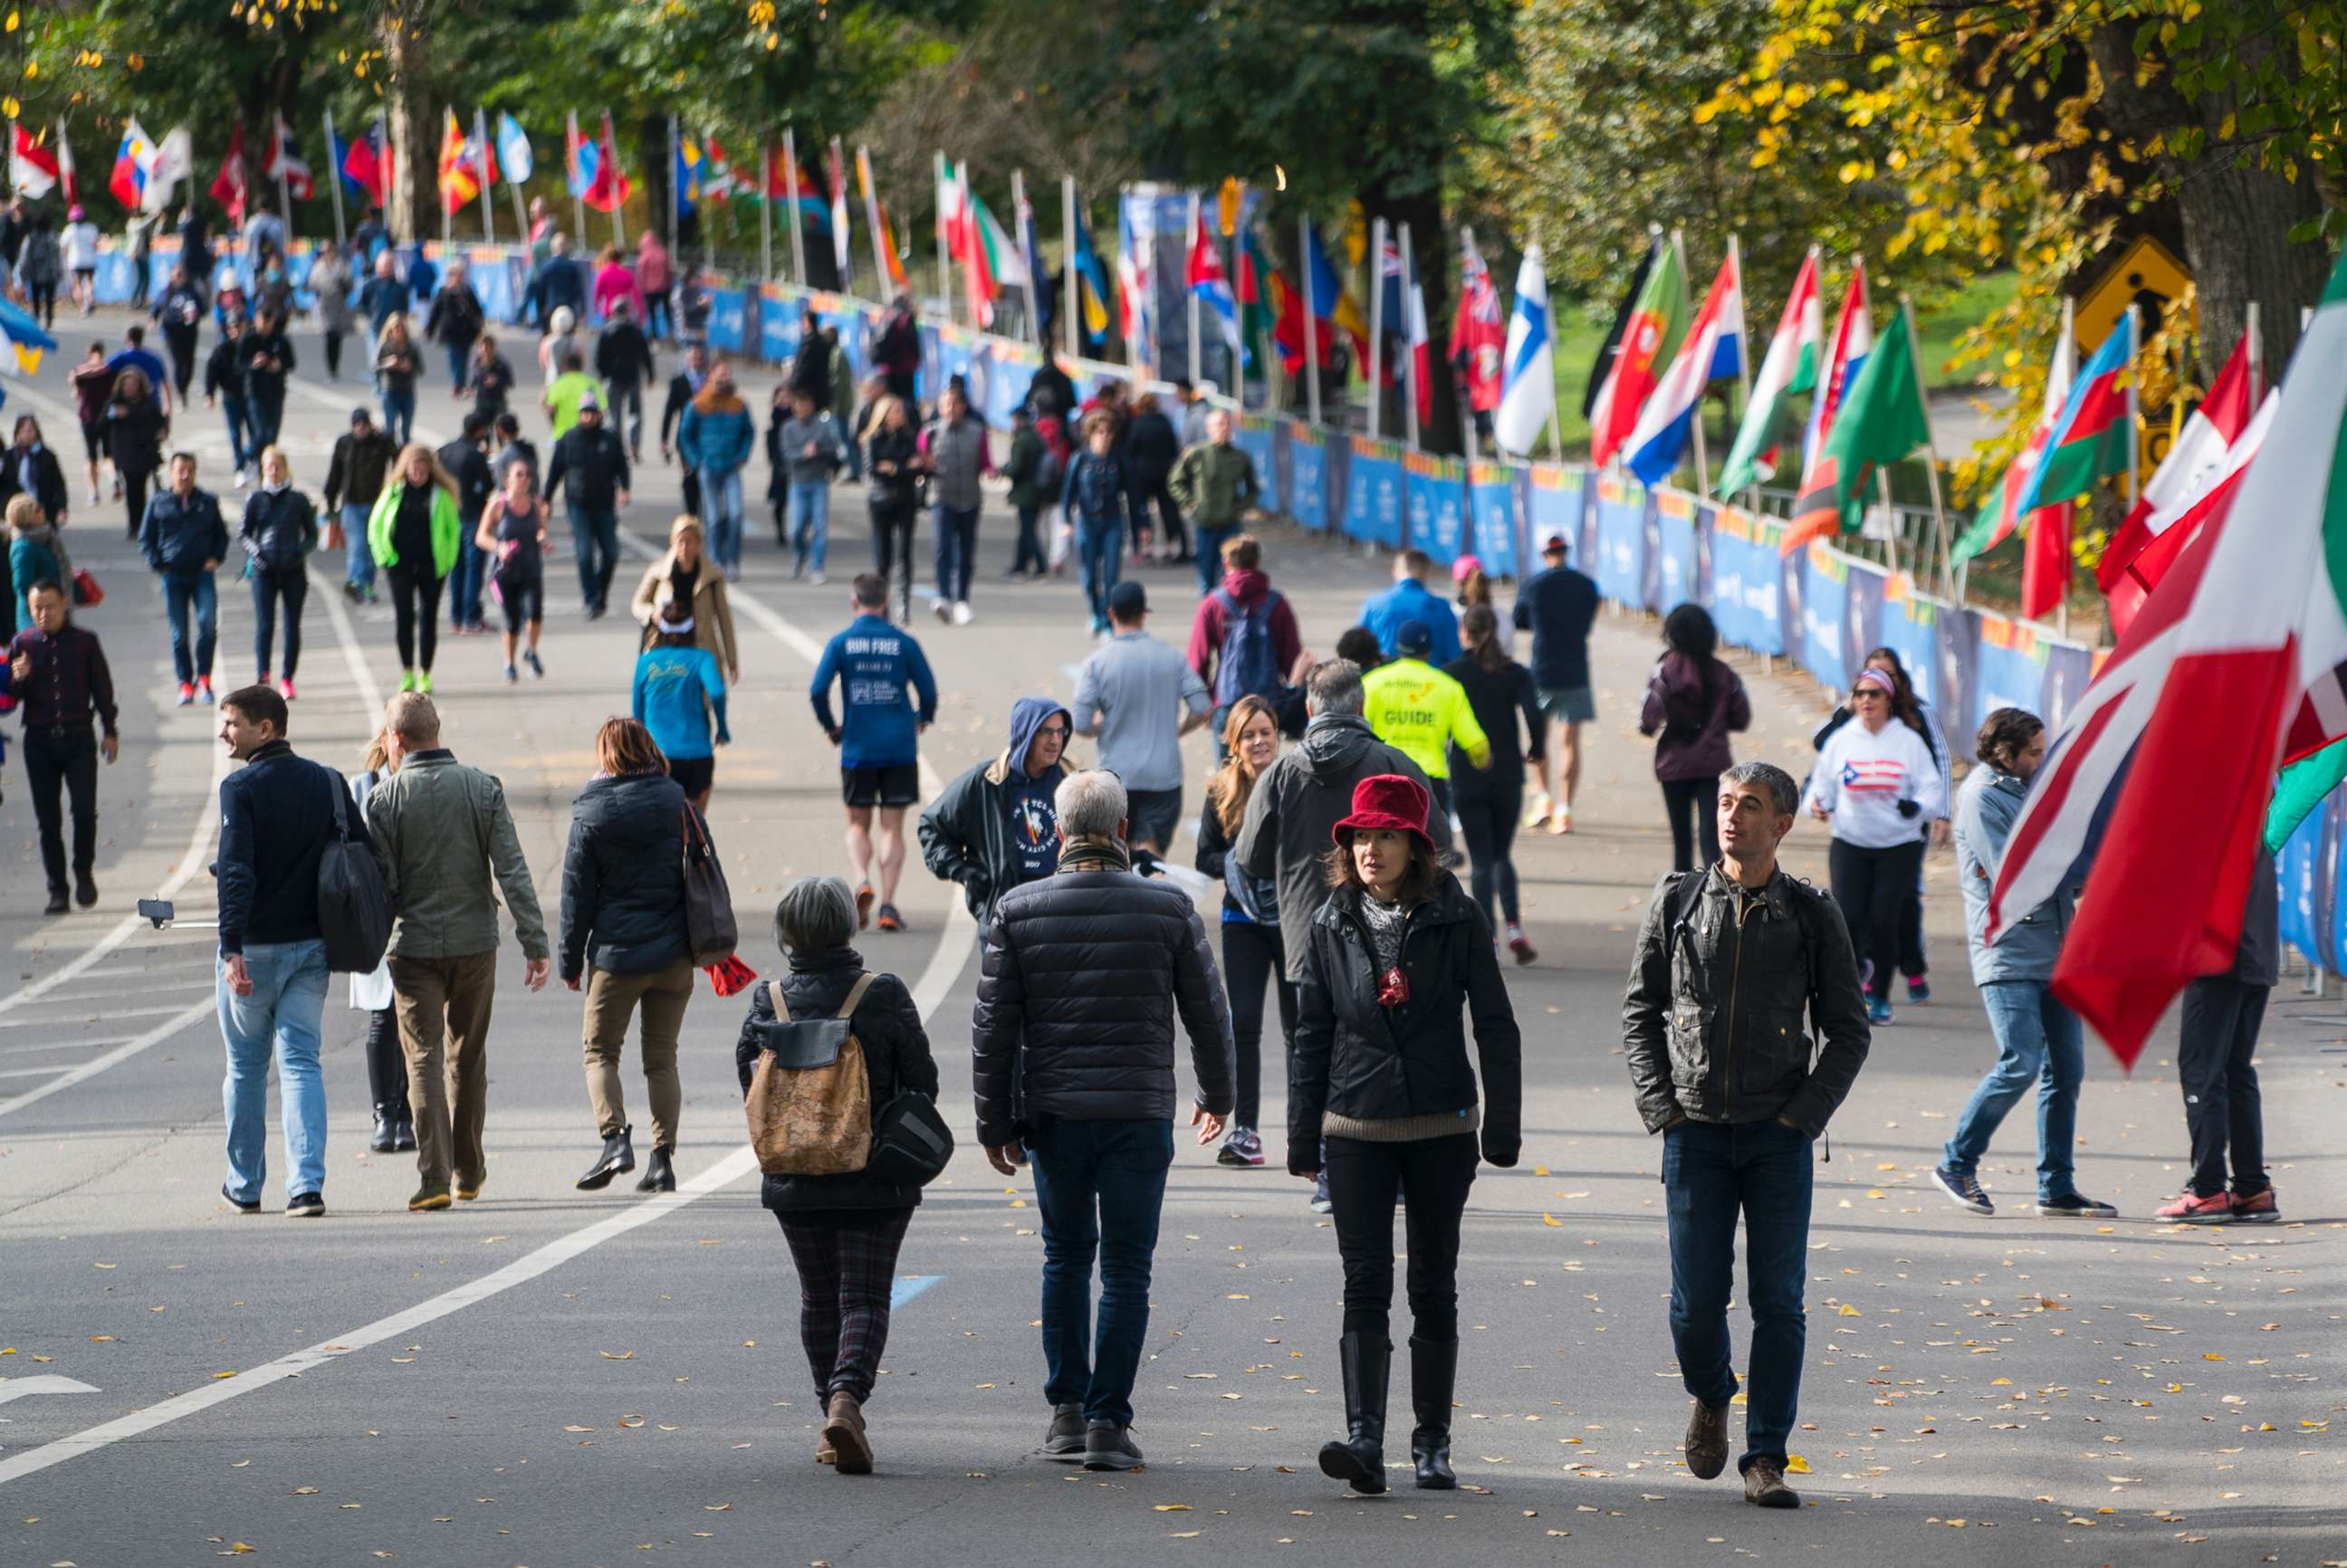 PHOTO: Pedestrians and runners move along Central Park's West Drive in New York as they come together near the finish line area of the New York City Marathon, Nov. 4, 2017, one day before the race hosts thousands of participants from around the world.